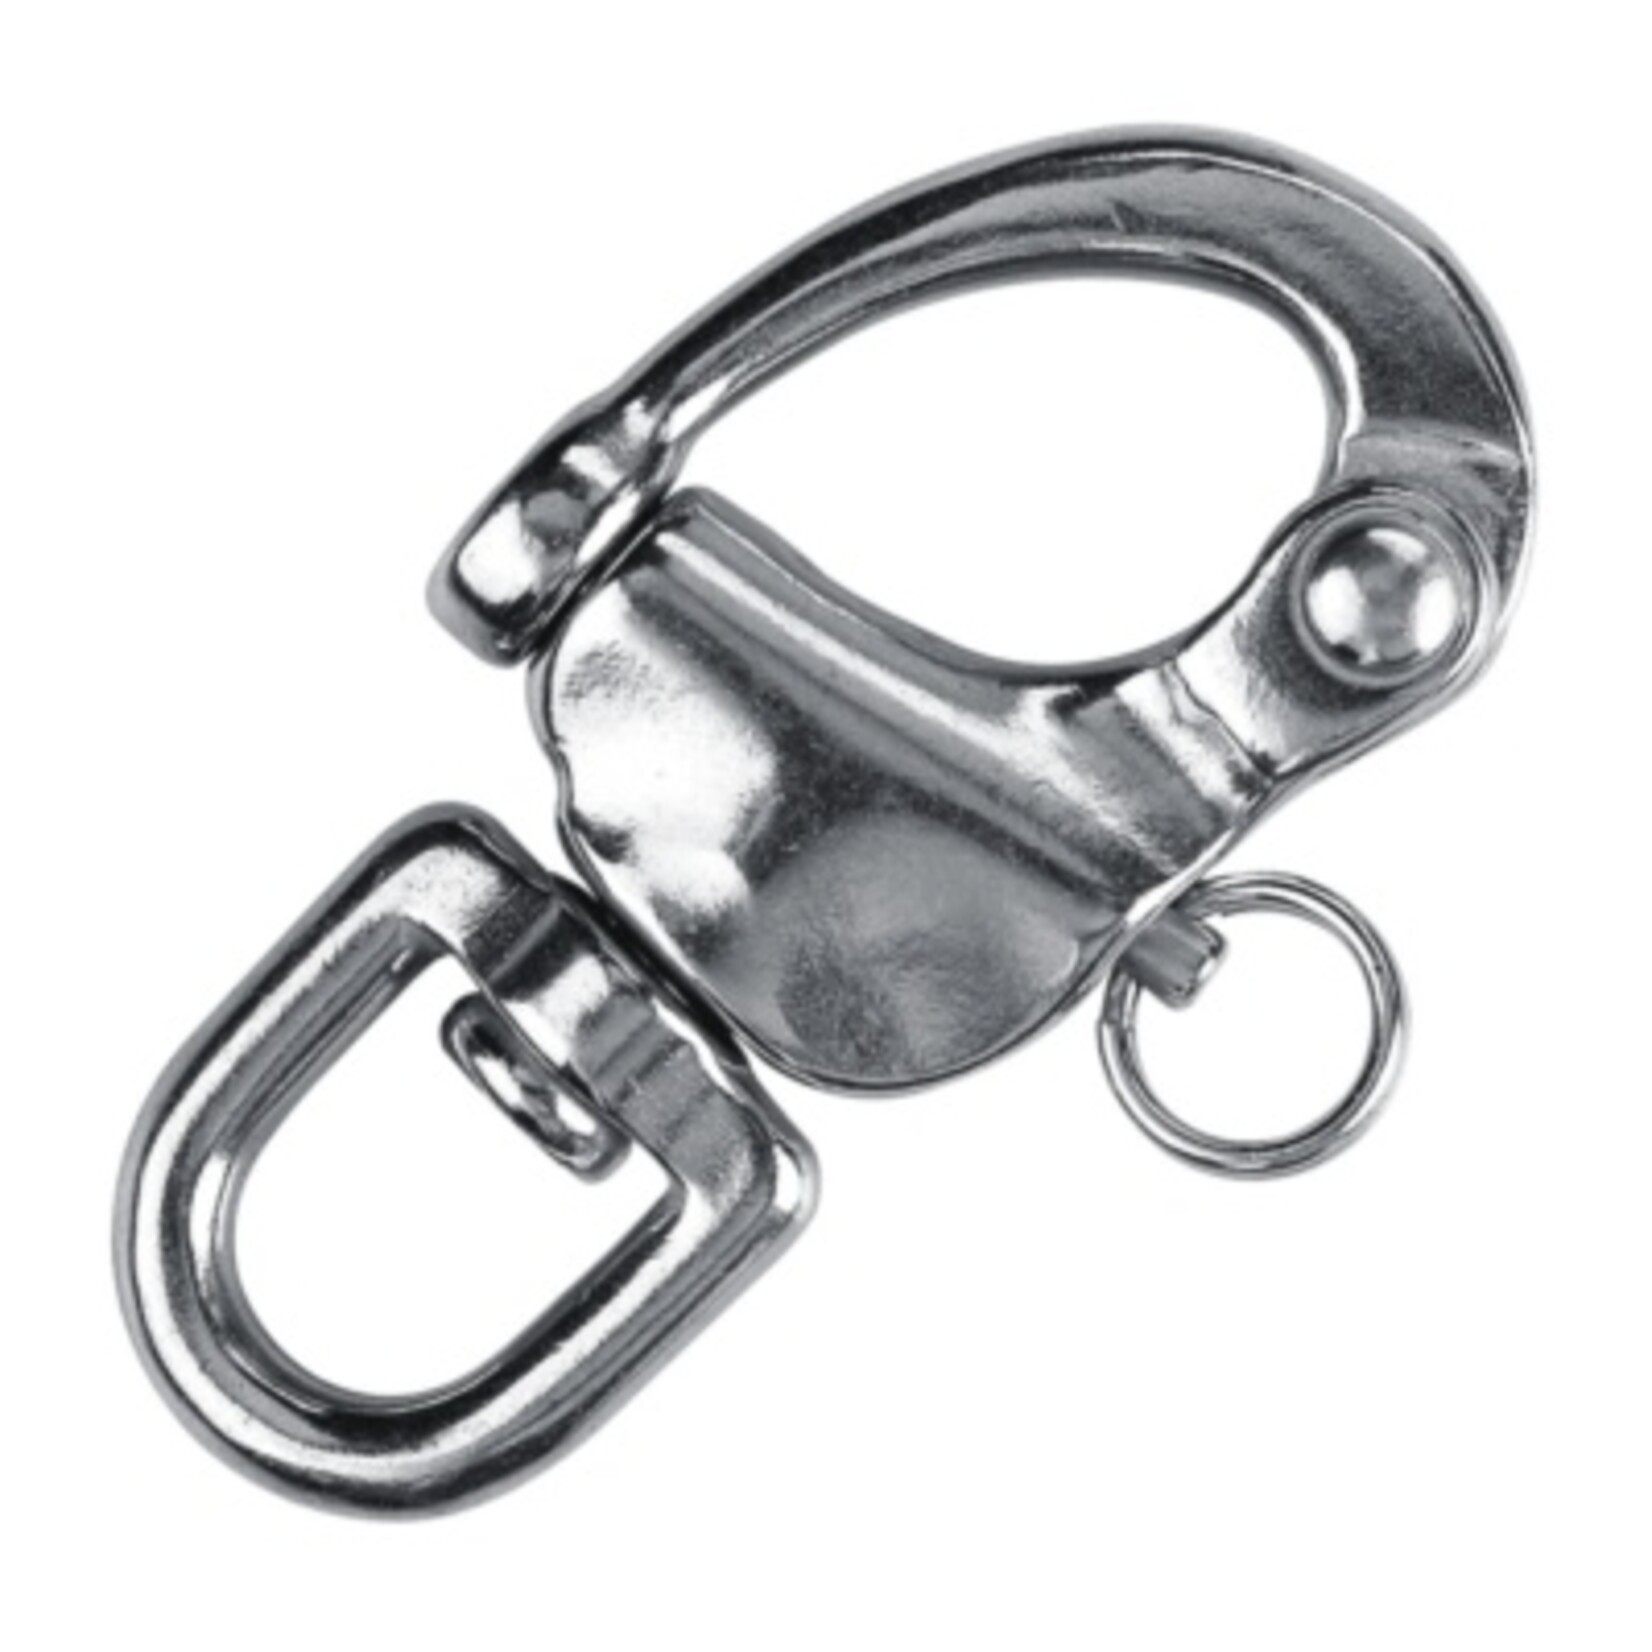 Plastimo Snap shackle s/s with swivel eye 70mm